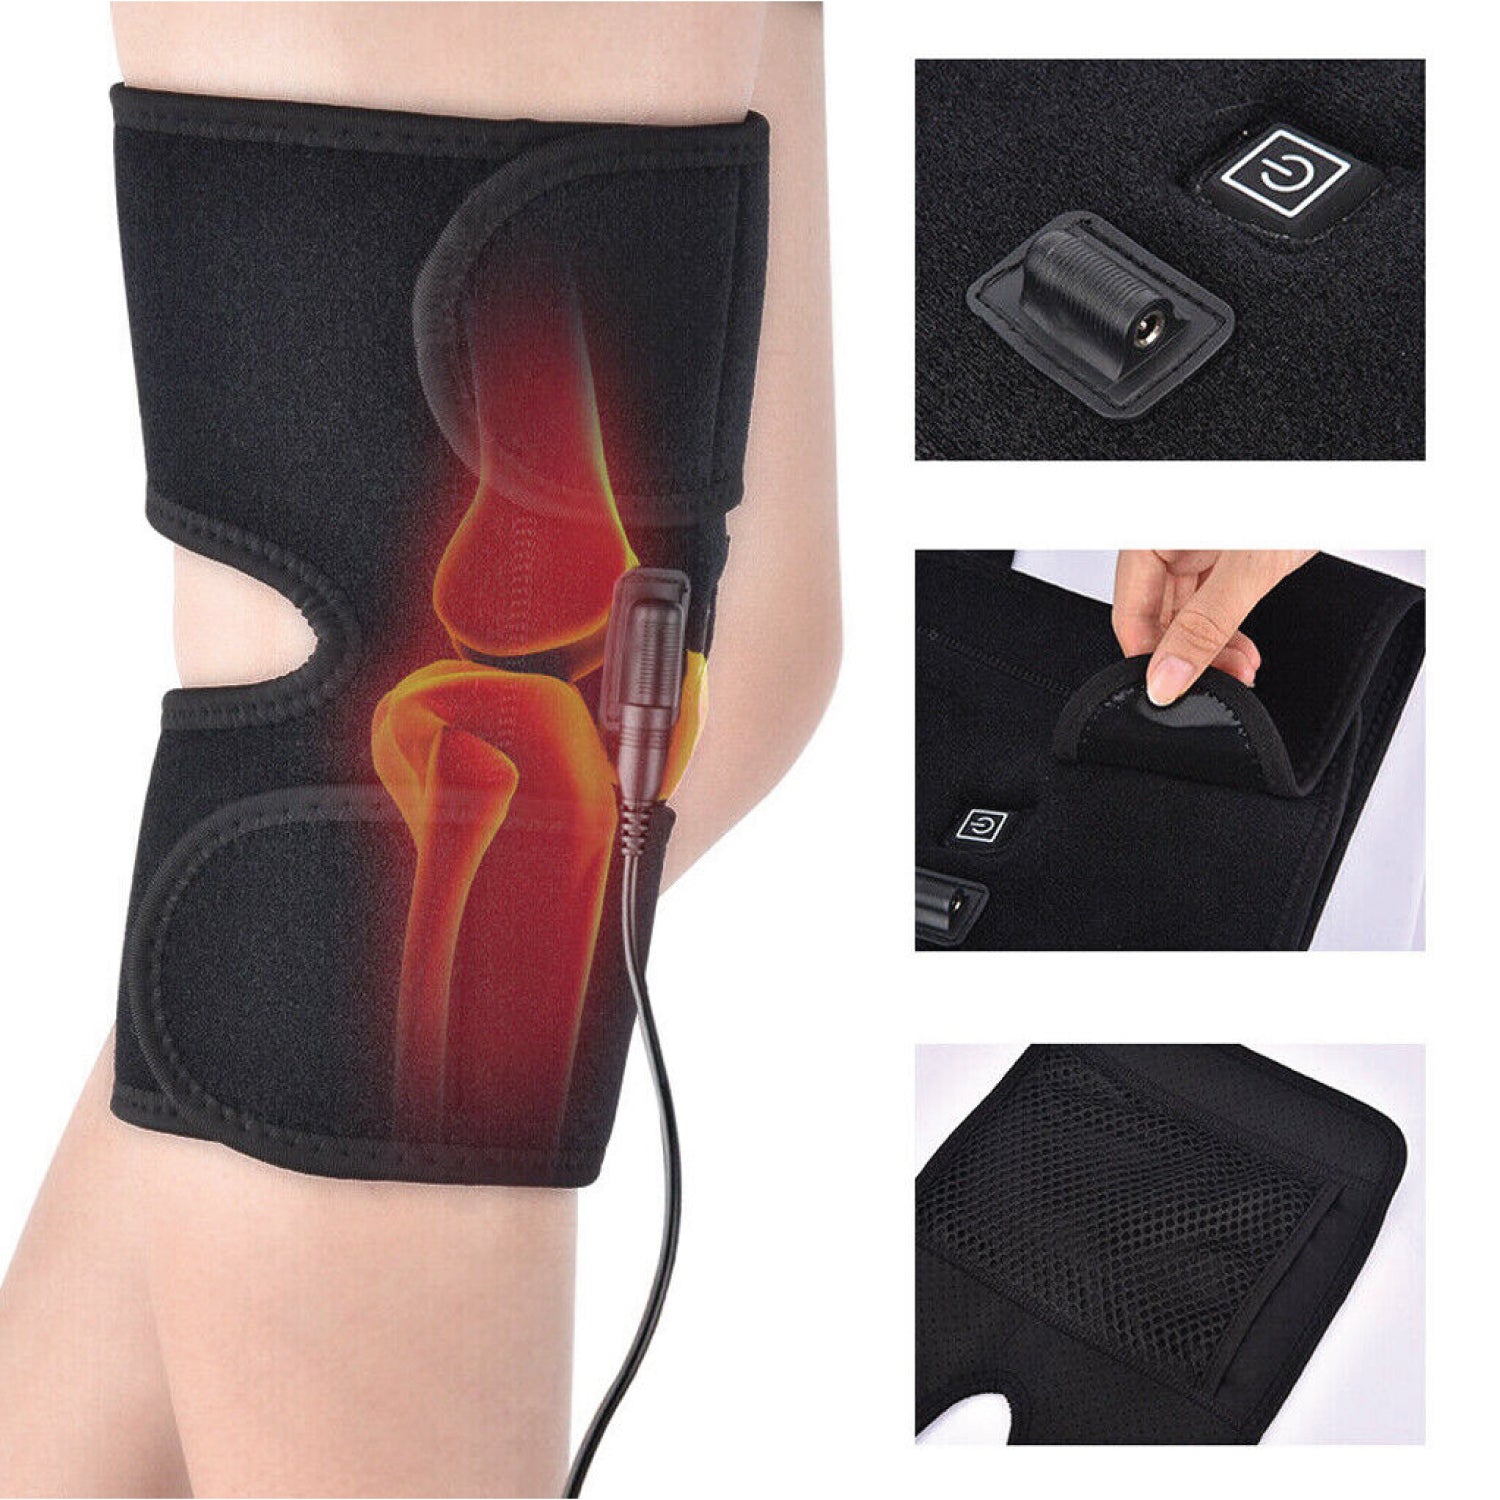 Heated Knee Brace - Electric Therapeutic Heating Pad